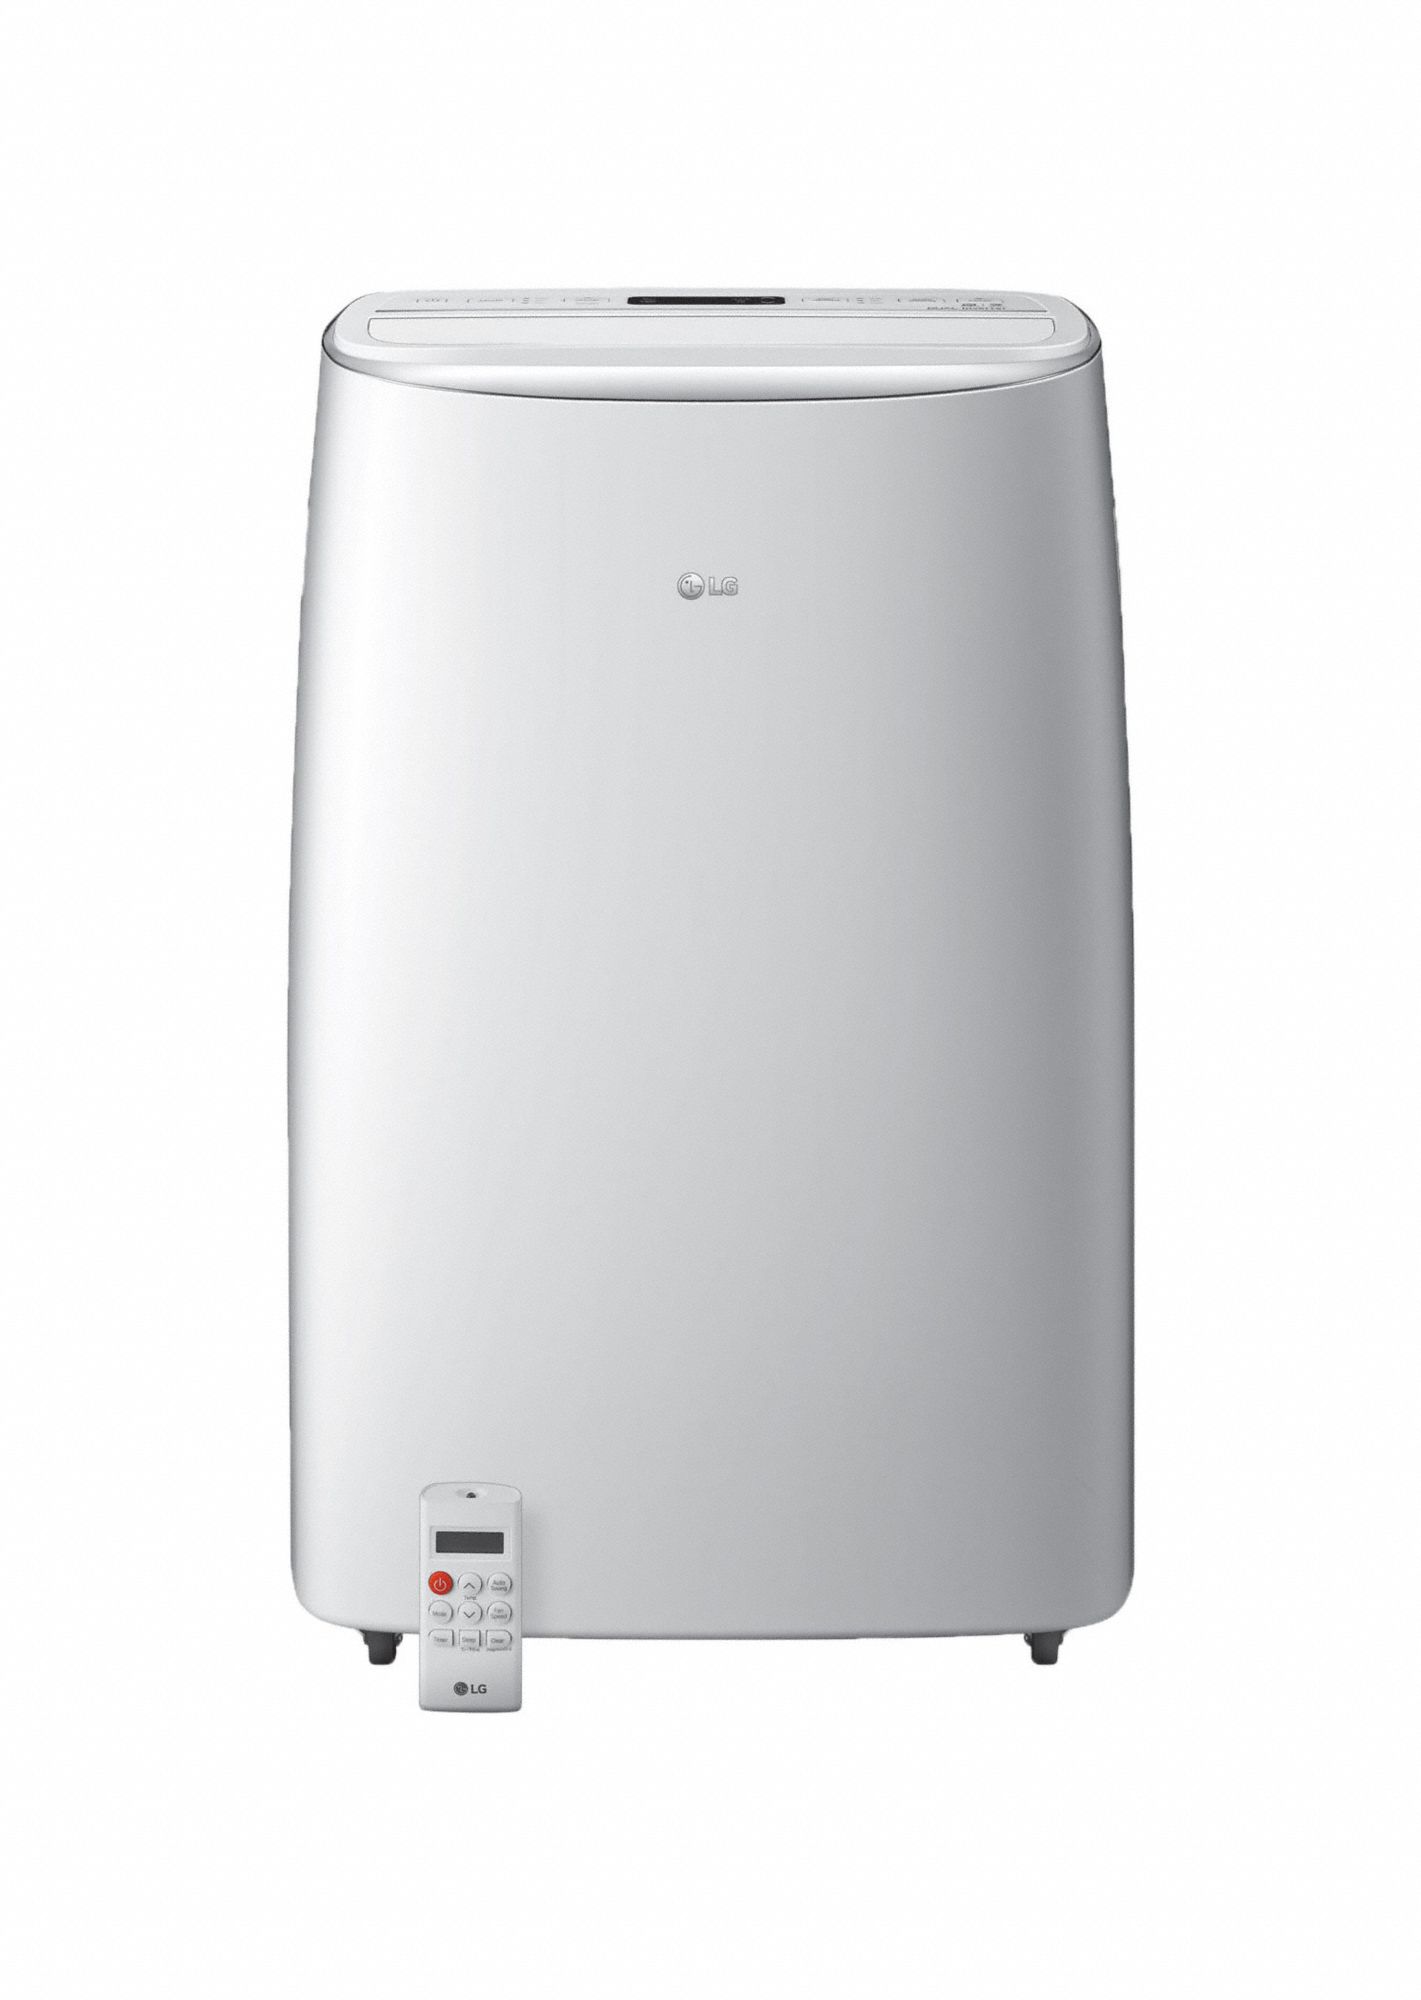 Portable Air Conditioner: 10,000 BtuH, 400 to 450 sq ft, 115V AC, 5-15P